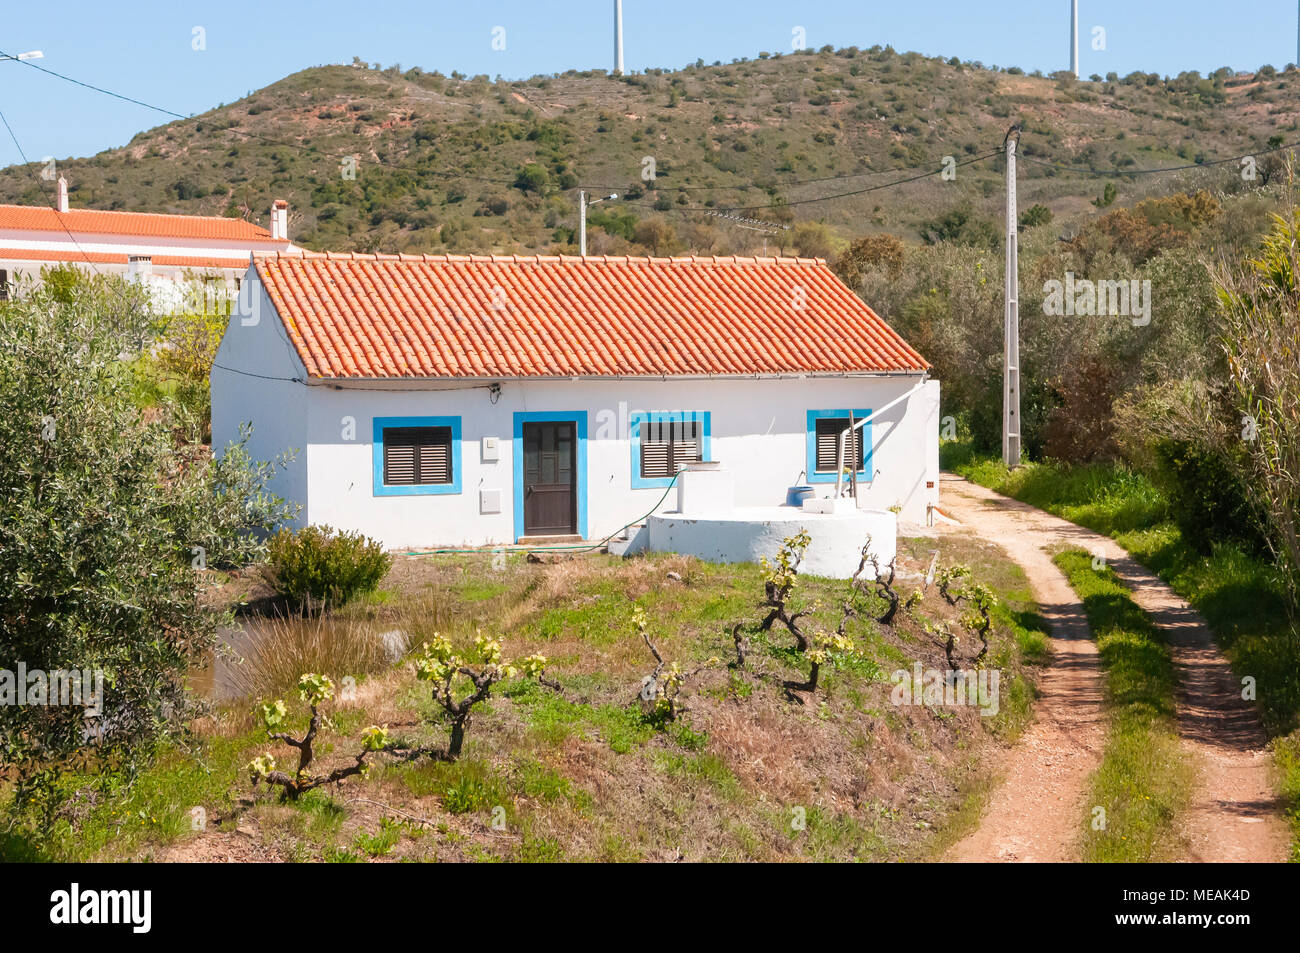 Whitewashed Portuguese farmhouse cottage with red terracotta roof tiles in rural Algarve, Portugal. Stock Photo